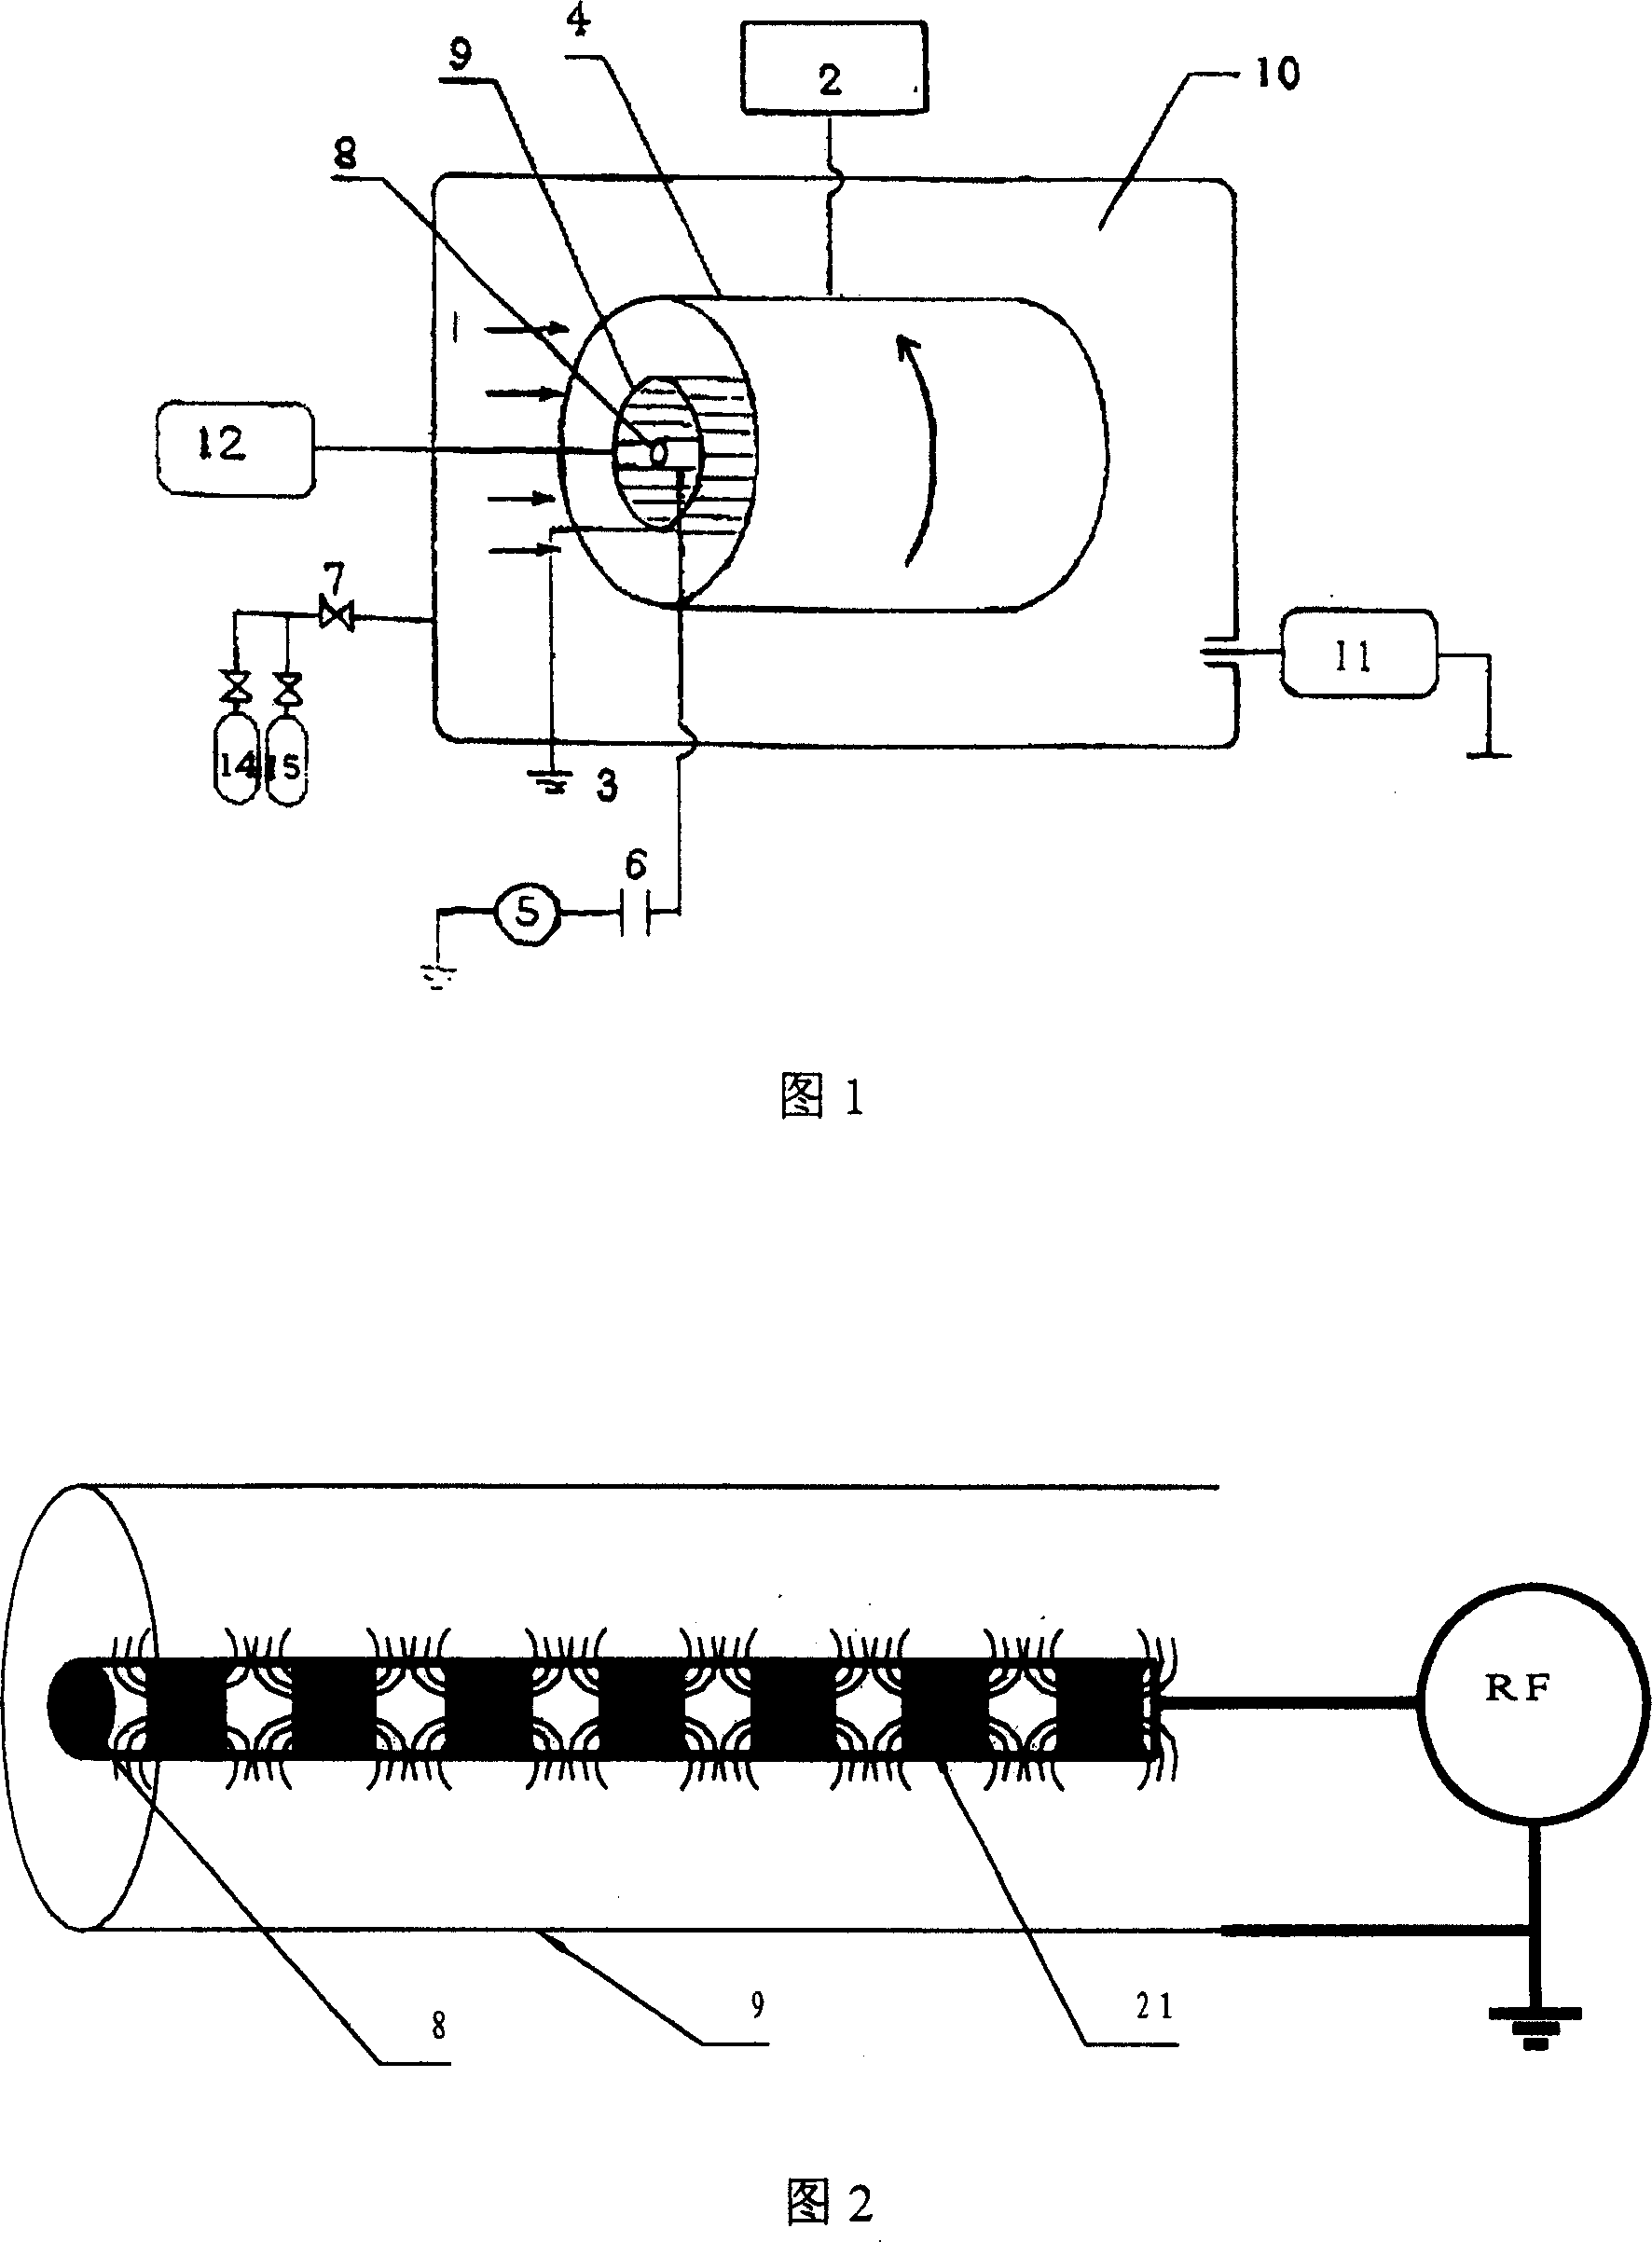 Apparatus for inner surface modification by plasma source ion implantation